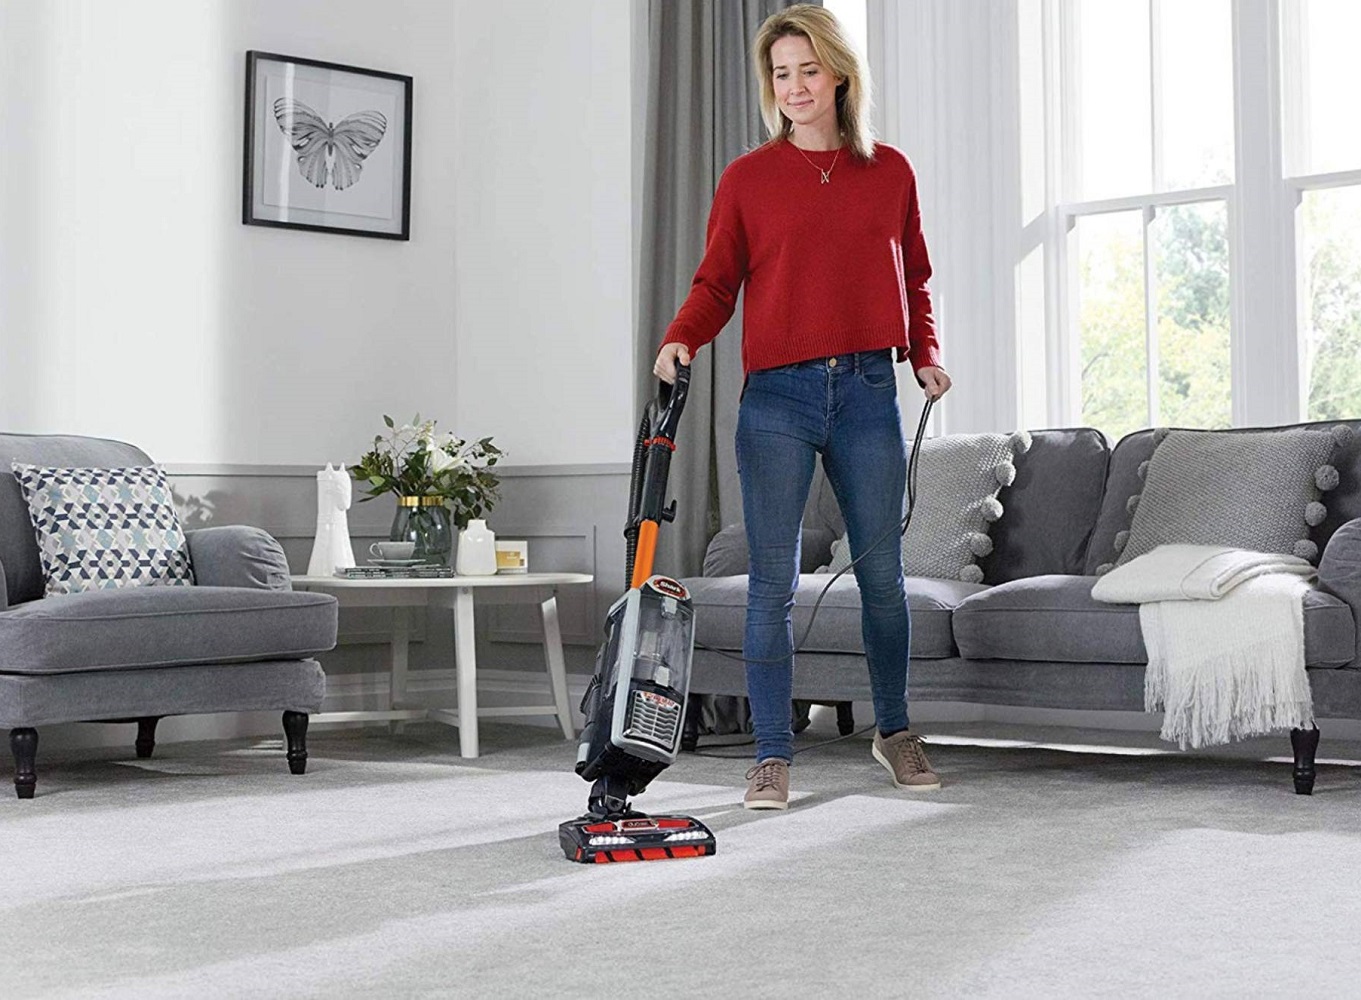 7 Best Upright Vacuum Cleaners for December 2022